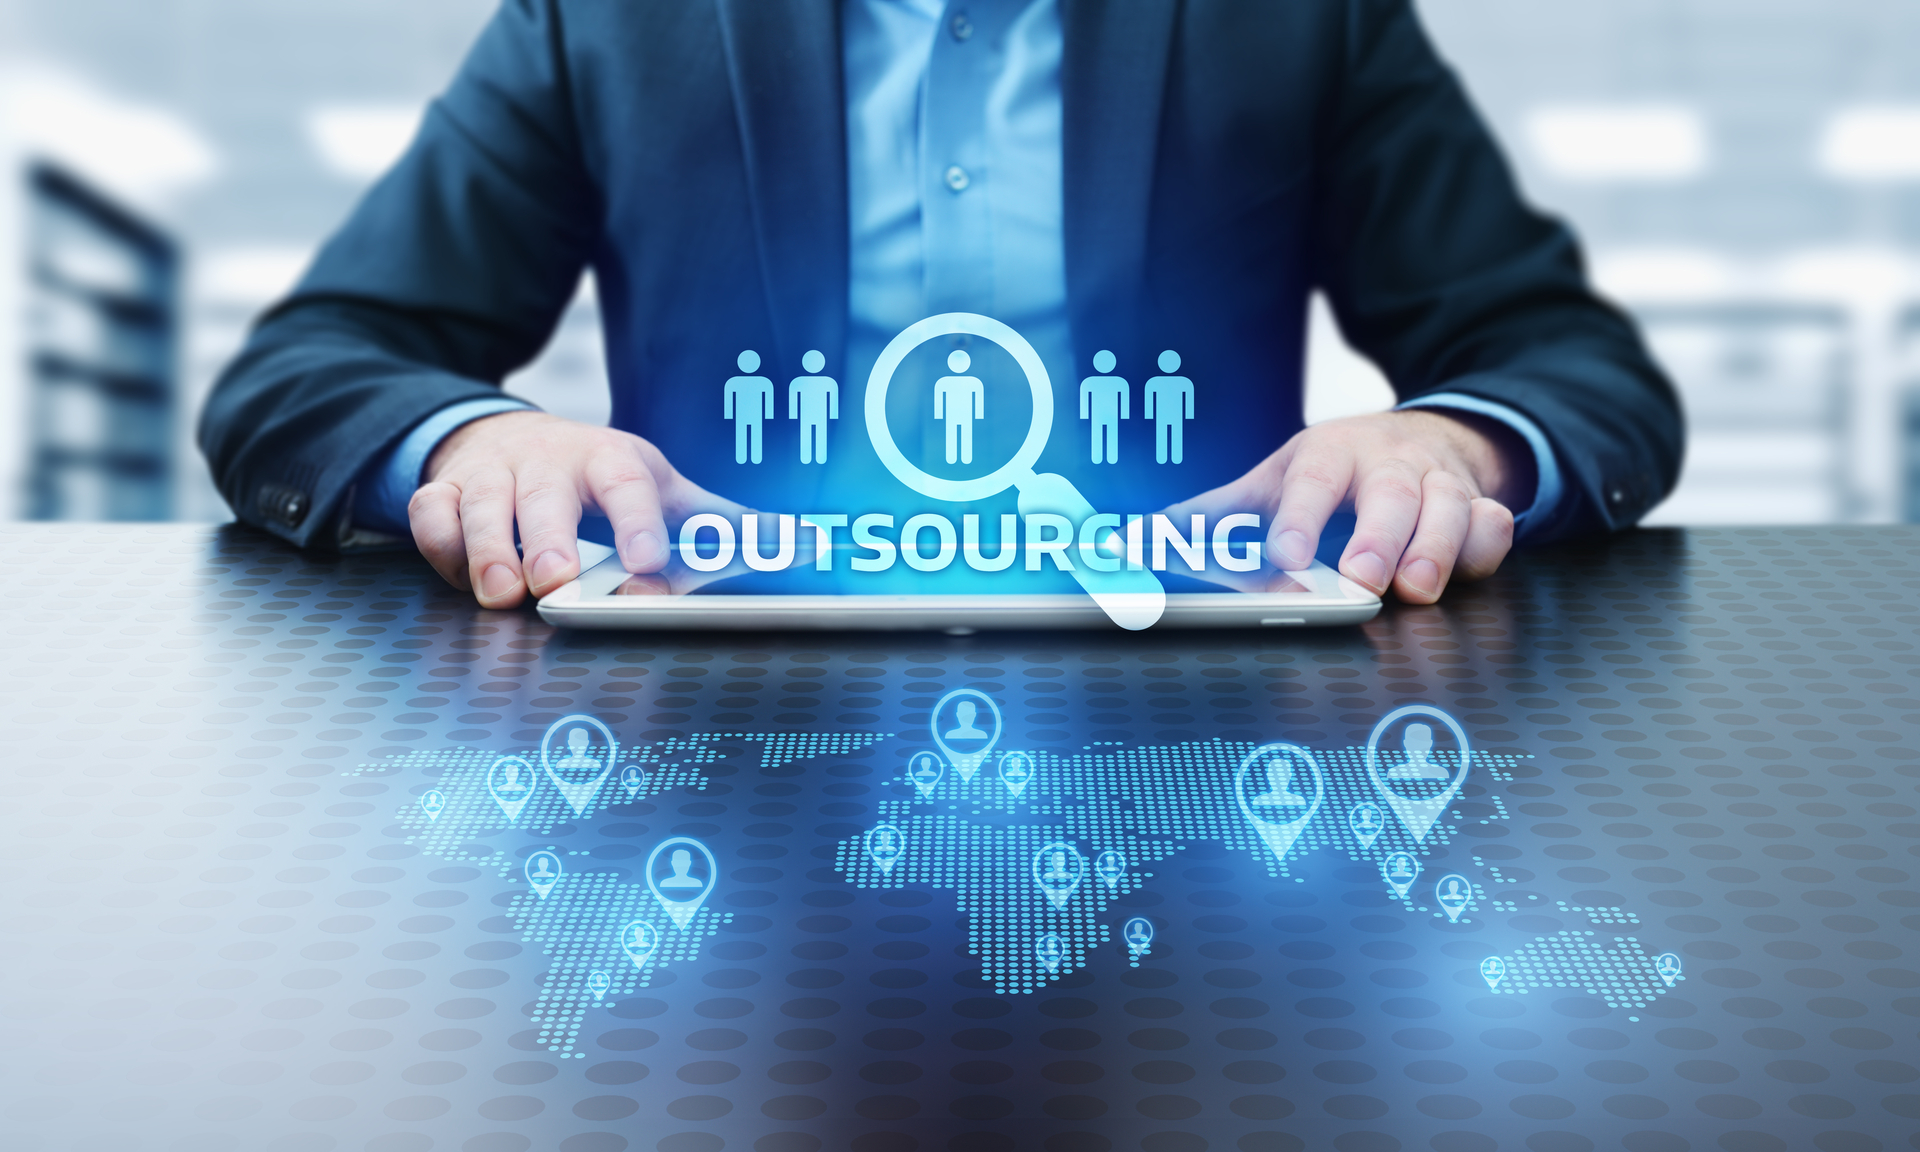 IT Outsourcing support | Tech Companies In Miami Florida